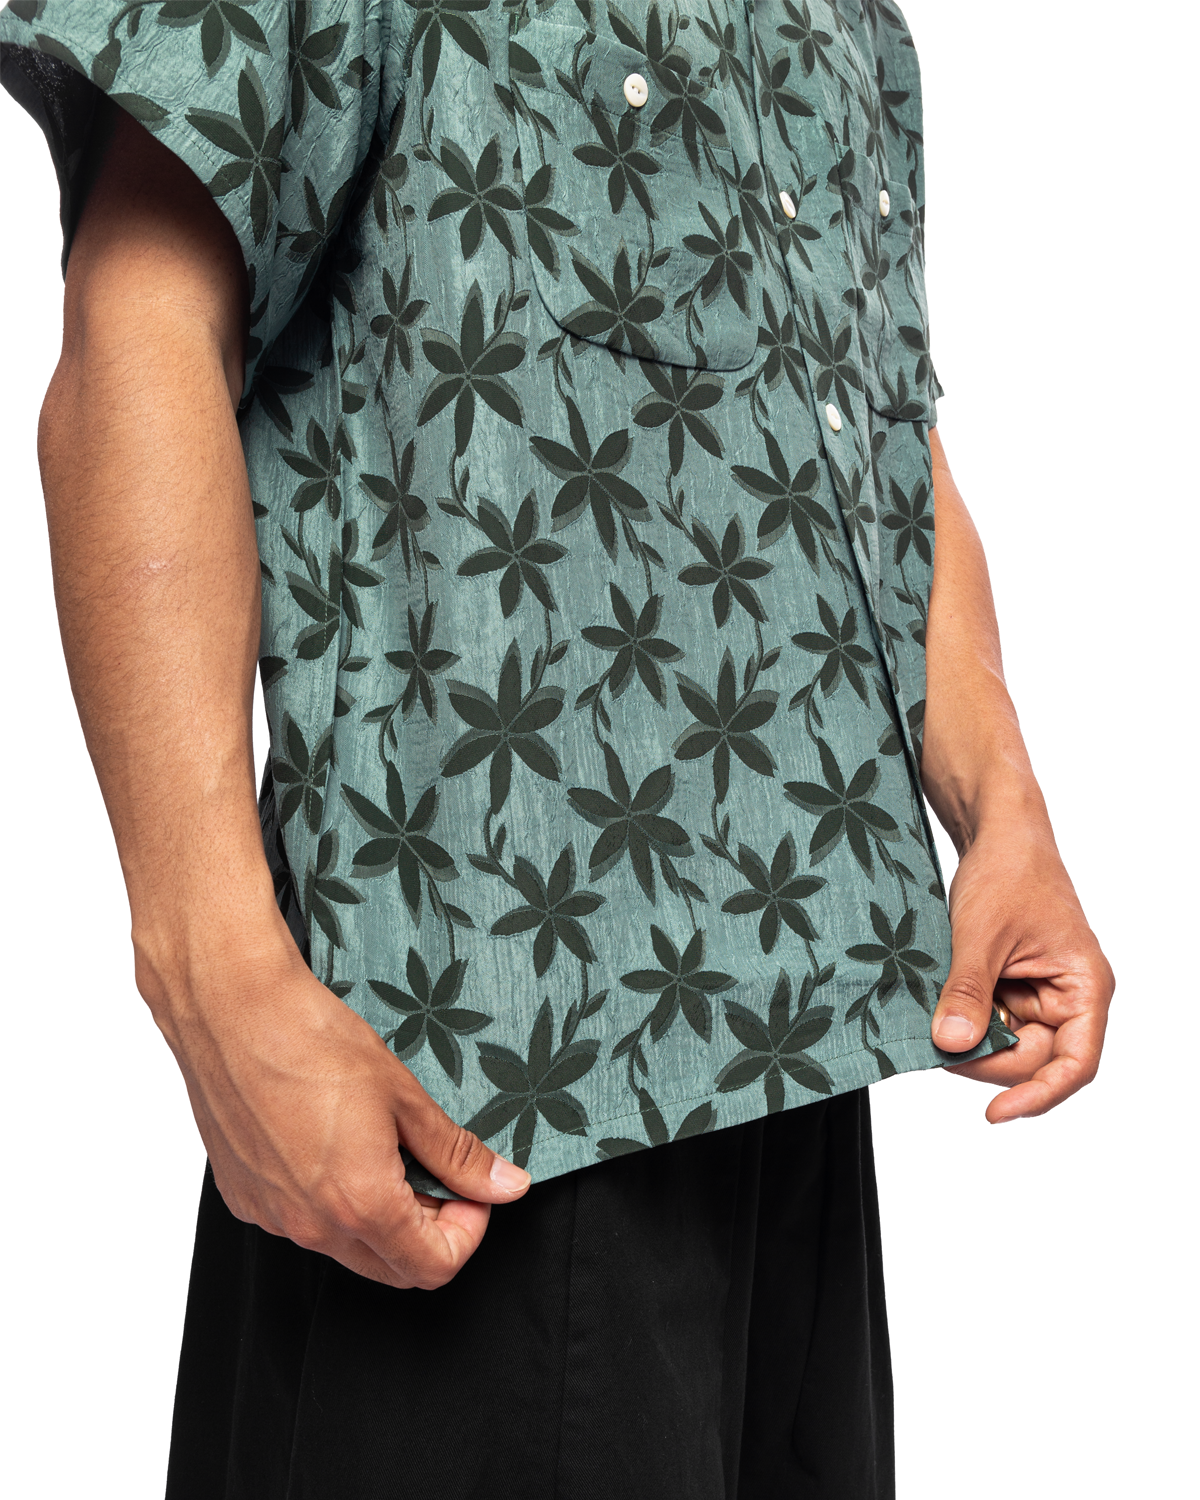 S/S One-Up Shirt - ACE/R Floral Jq Green